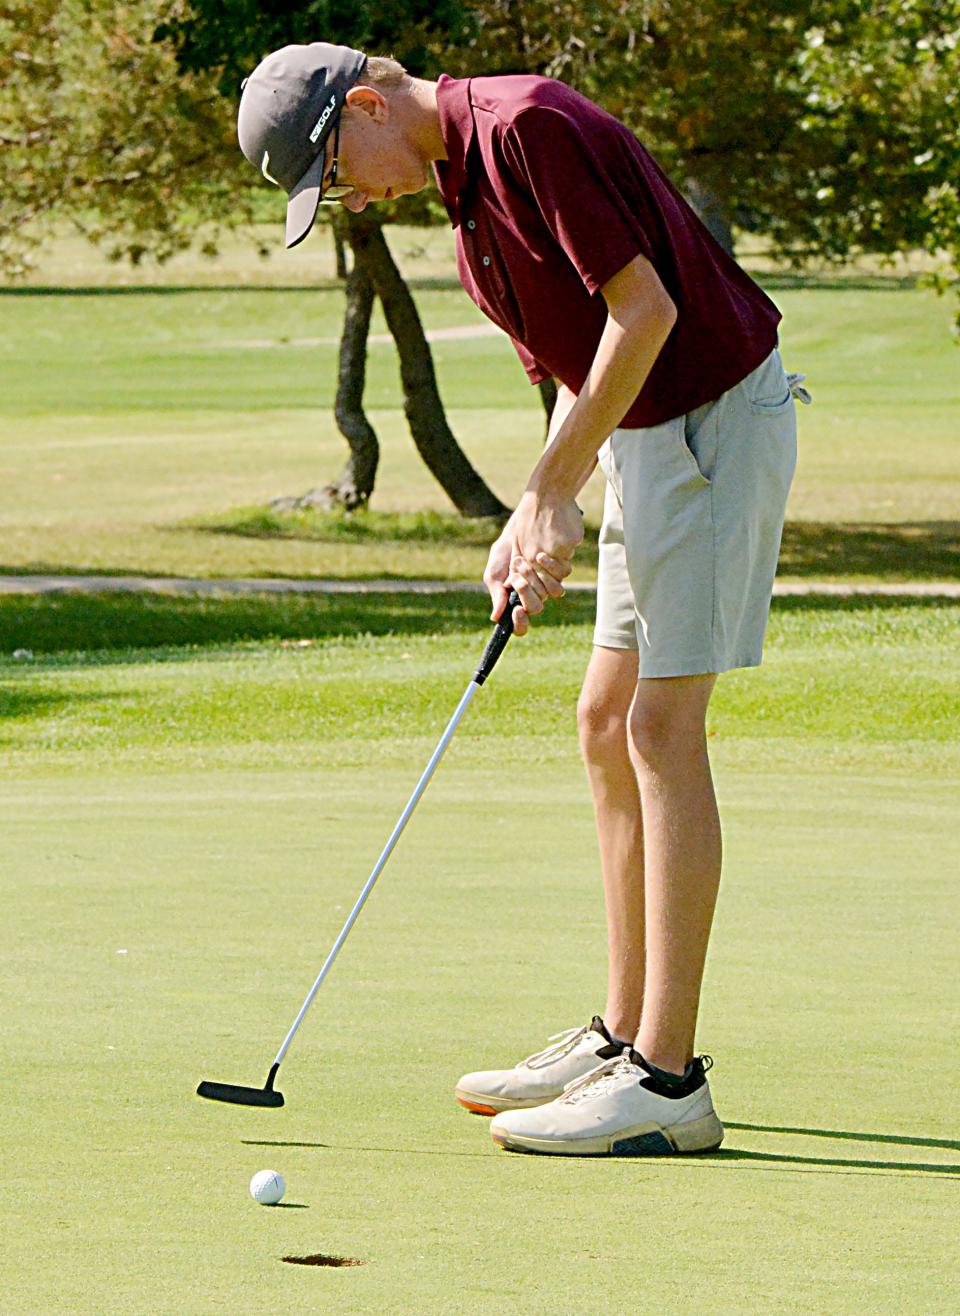 Jonathan DeBoer is one of three Milbank players slated to compete Monday and Tuesday, Oct. 3-4, 2022 in the state Class A high school boys golf tournament at the Moccasin Creek Country Club in Aberdeen.